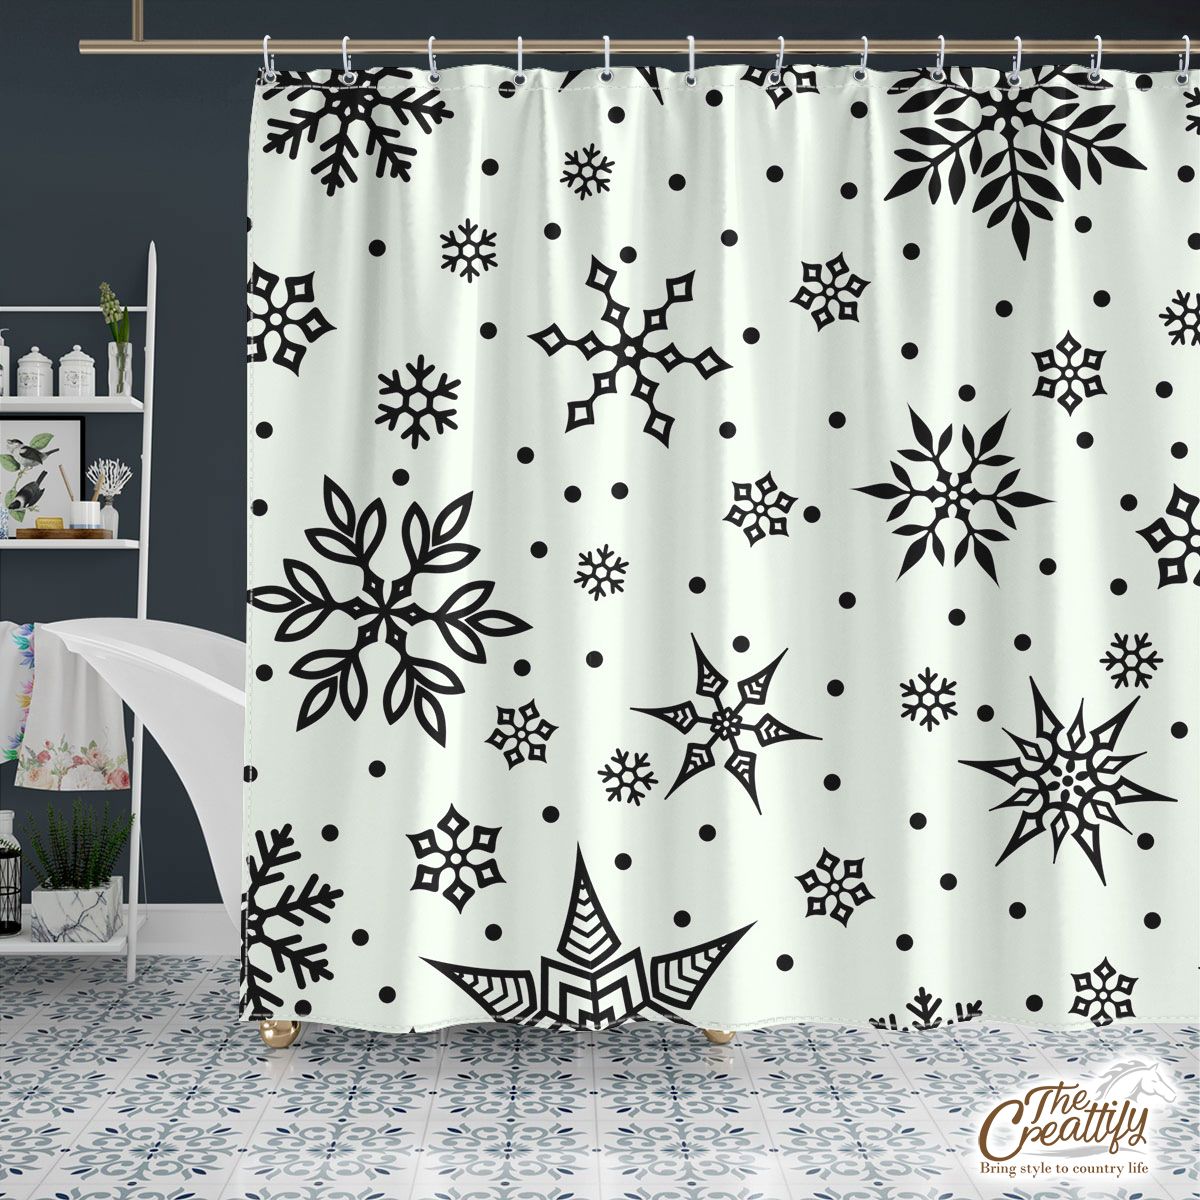 Black And White Snowflake Christmas Shower Curtain